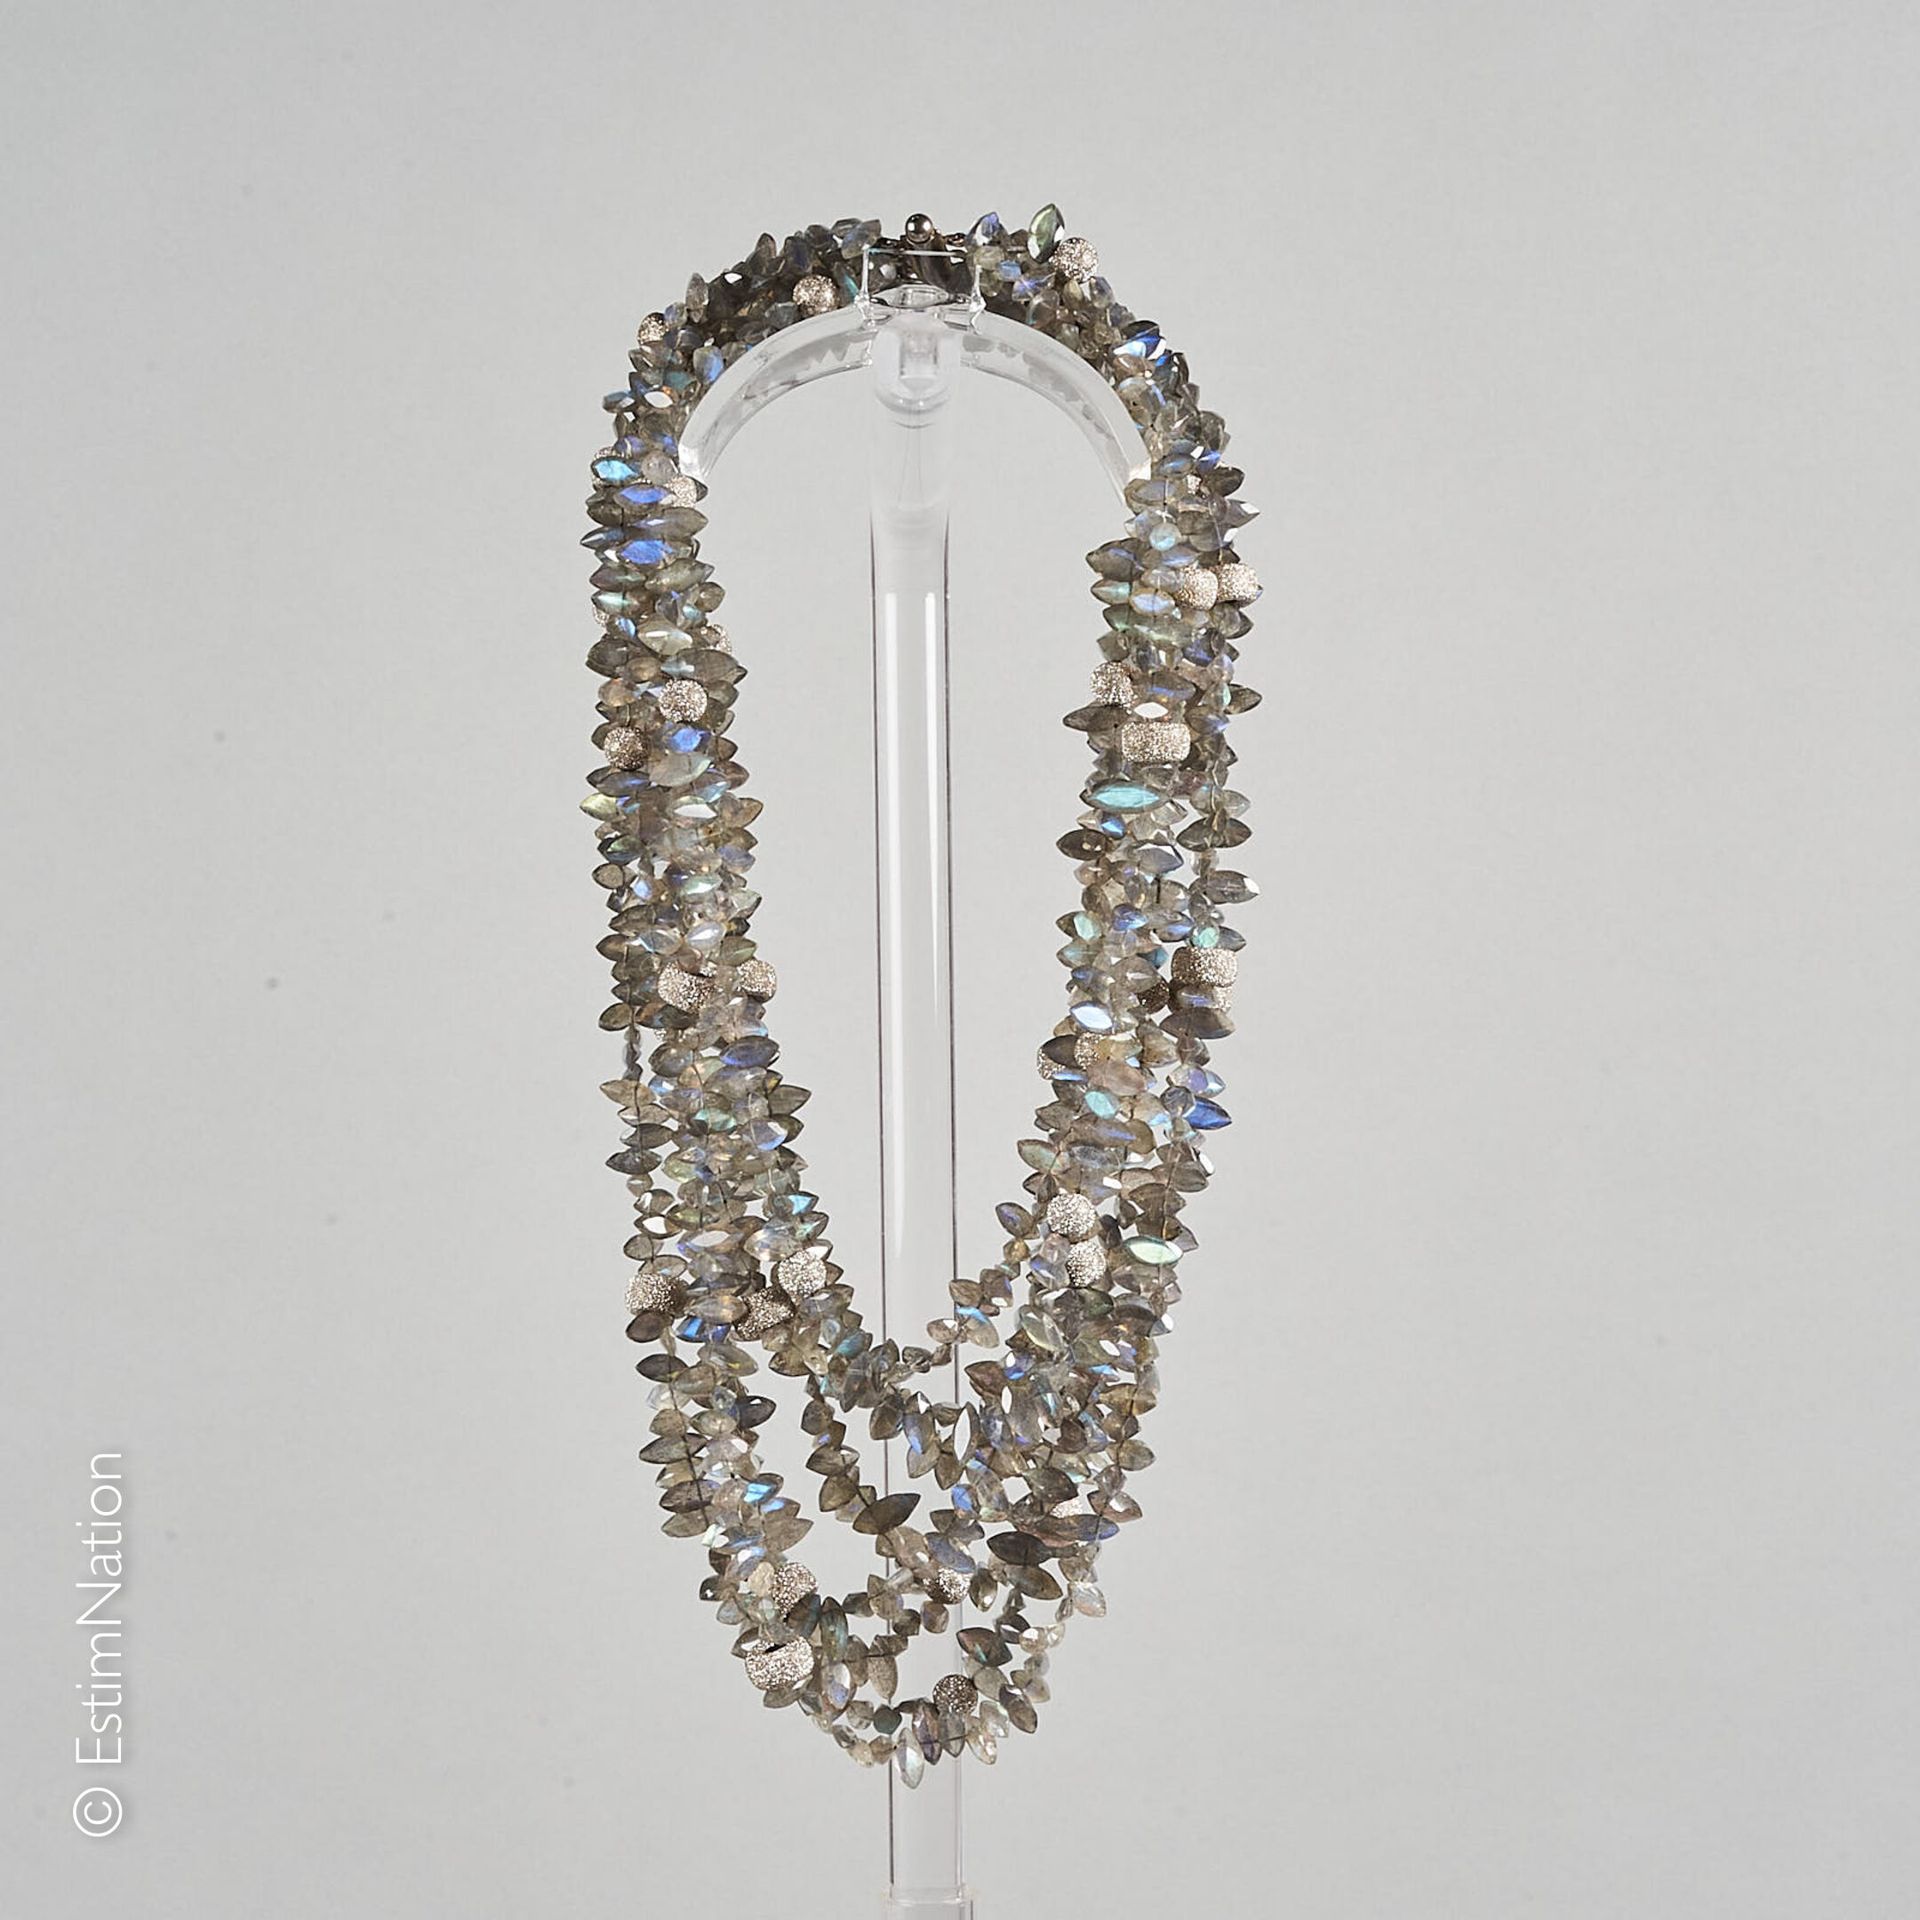 COLLIER DE LABARADORITE Important necklace in fall composed of eight rows of fac&hellip;